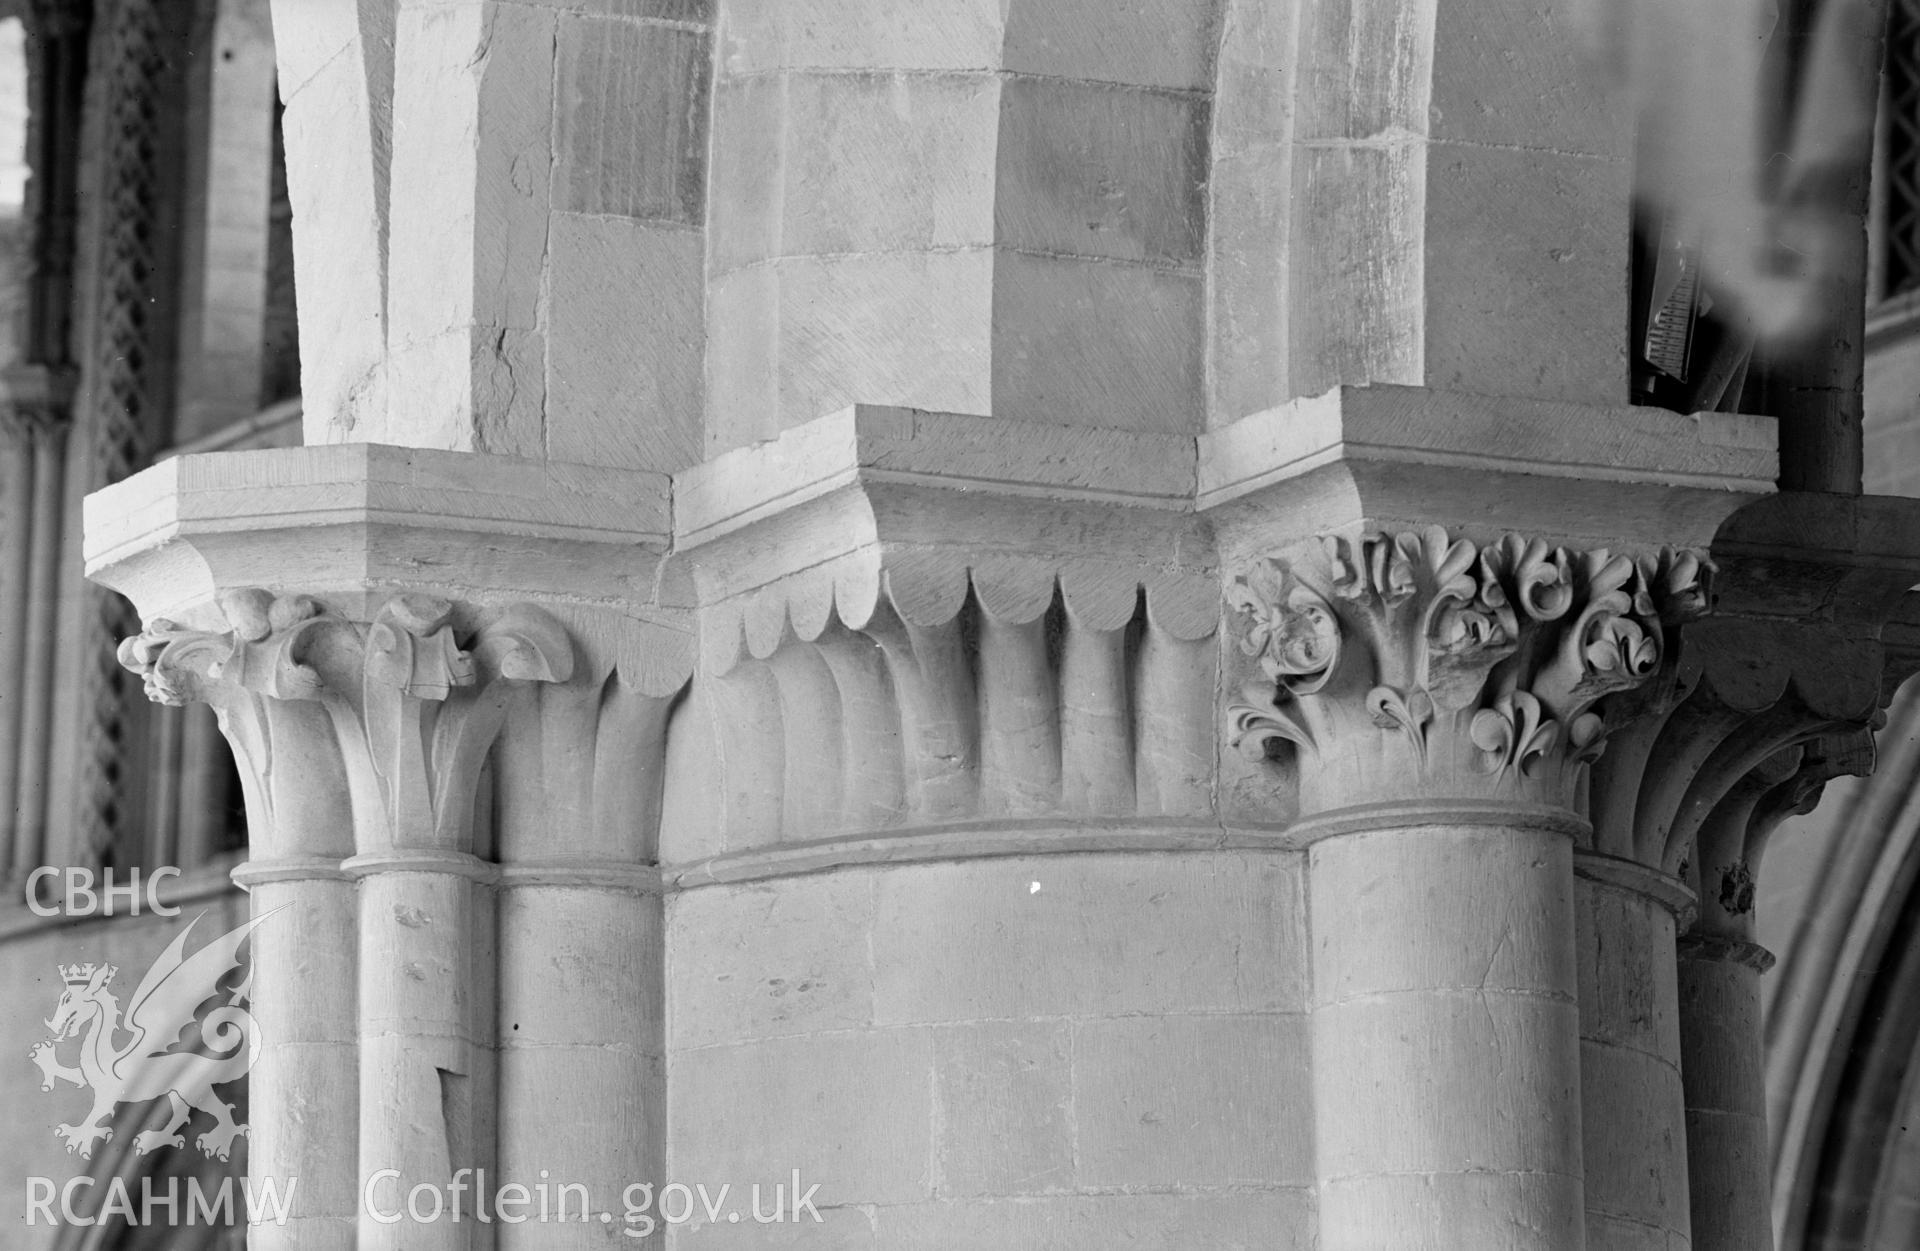 Digital copy of a black and white acetate negative showing detail of capital at St. David's Cathedral, taken by E.W. Lovegrove, July 1936.